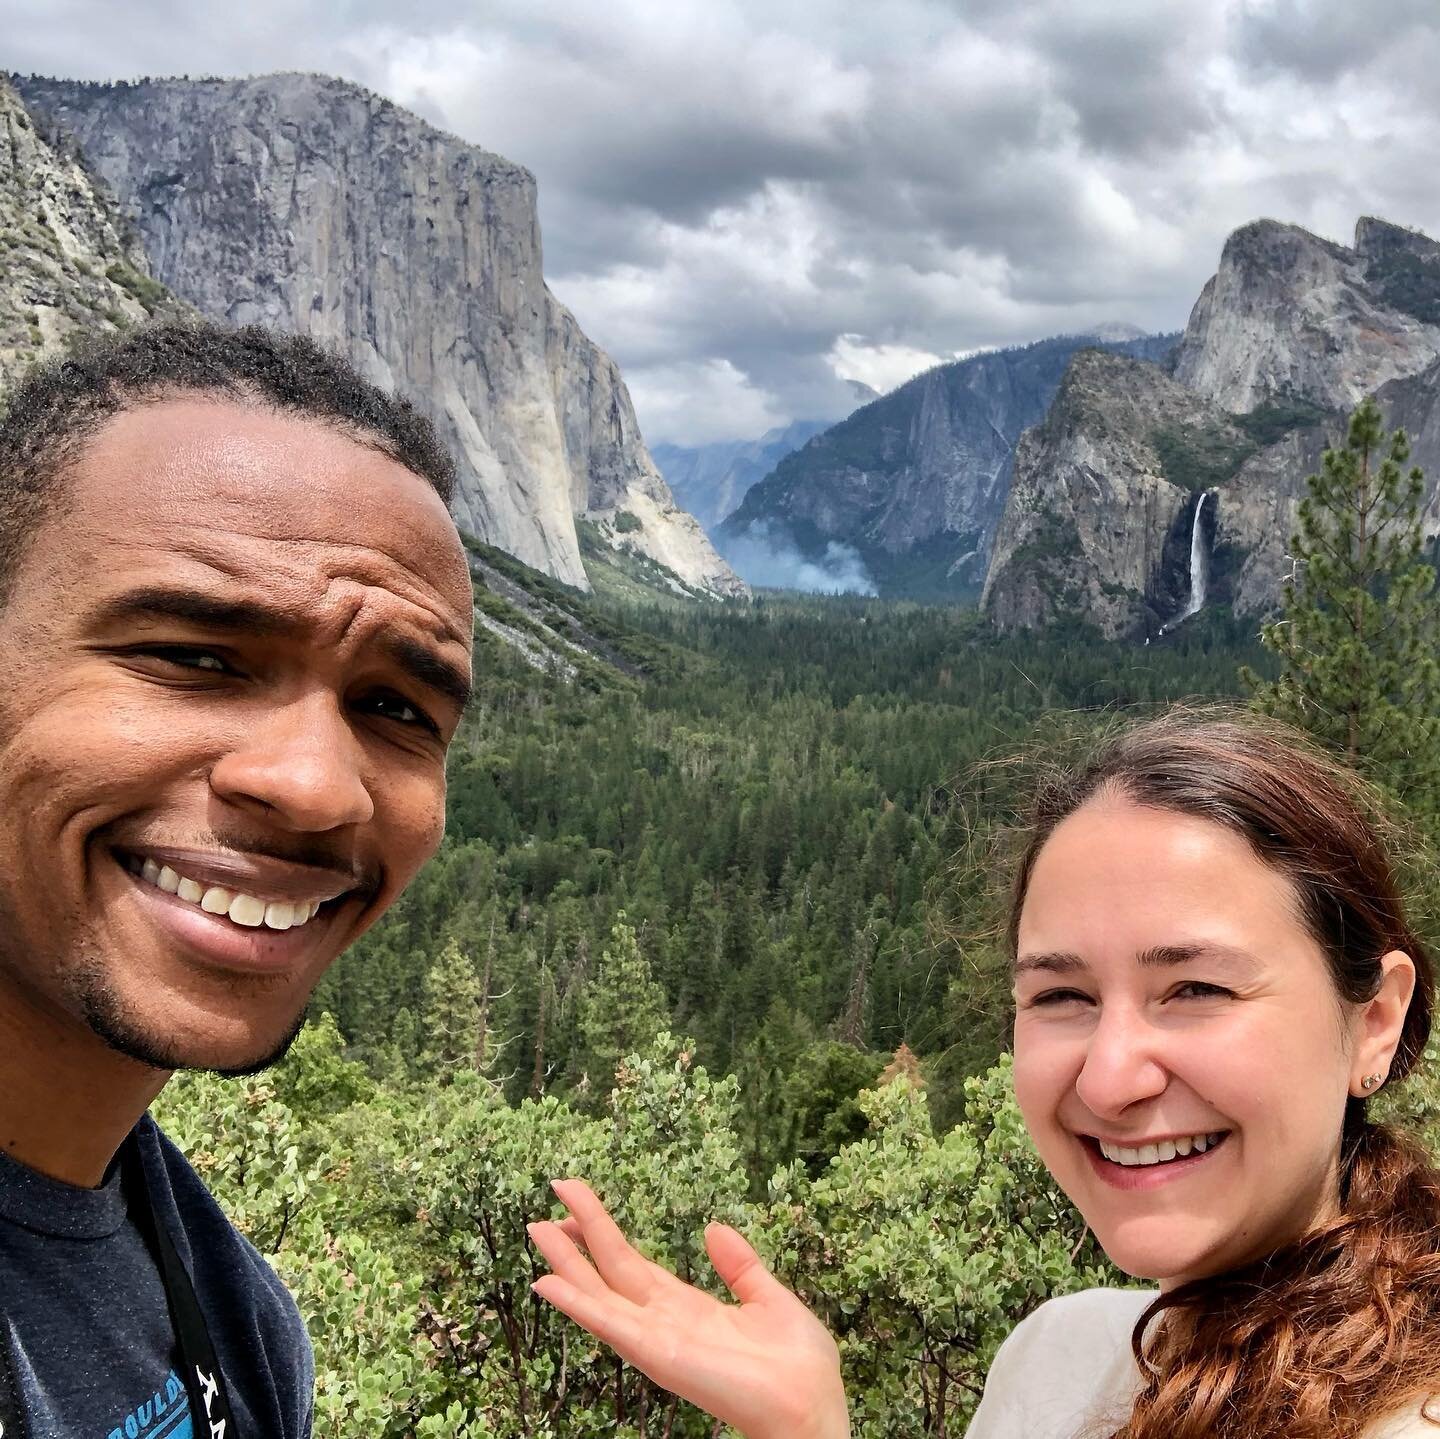 More pics from our Yosemite adventures with @brianclanton ✨🐛🦌🍃 what I don&rsquo;t have photos of is a mother bear with a newly born cub (aaawwww 😍) crossing the road in front of our car - that was extra magical! ✨